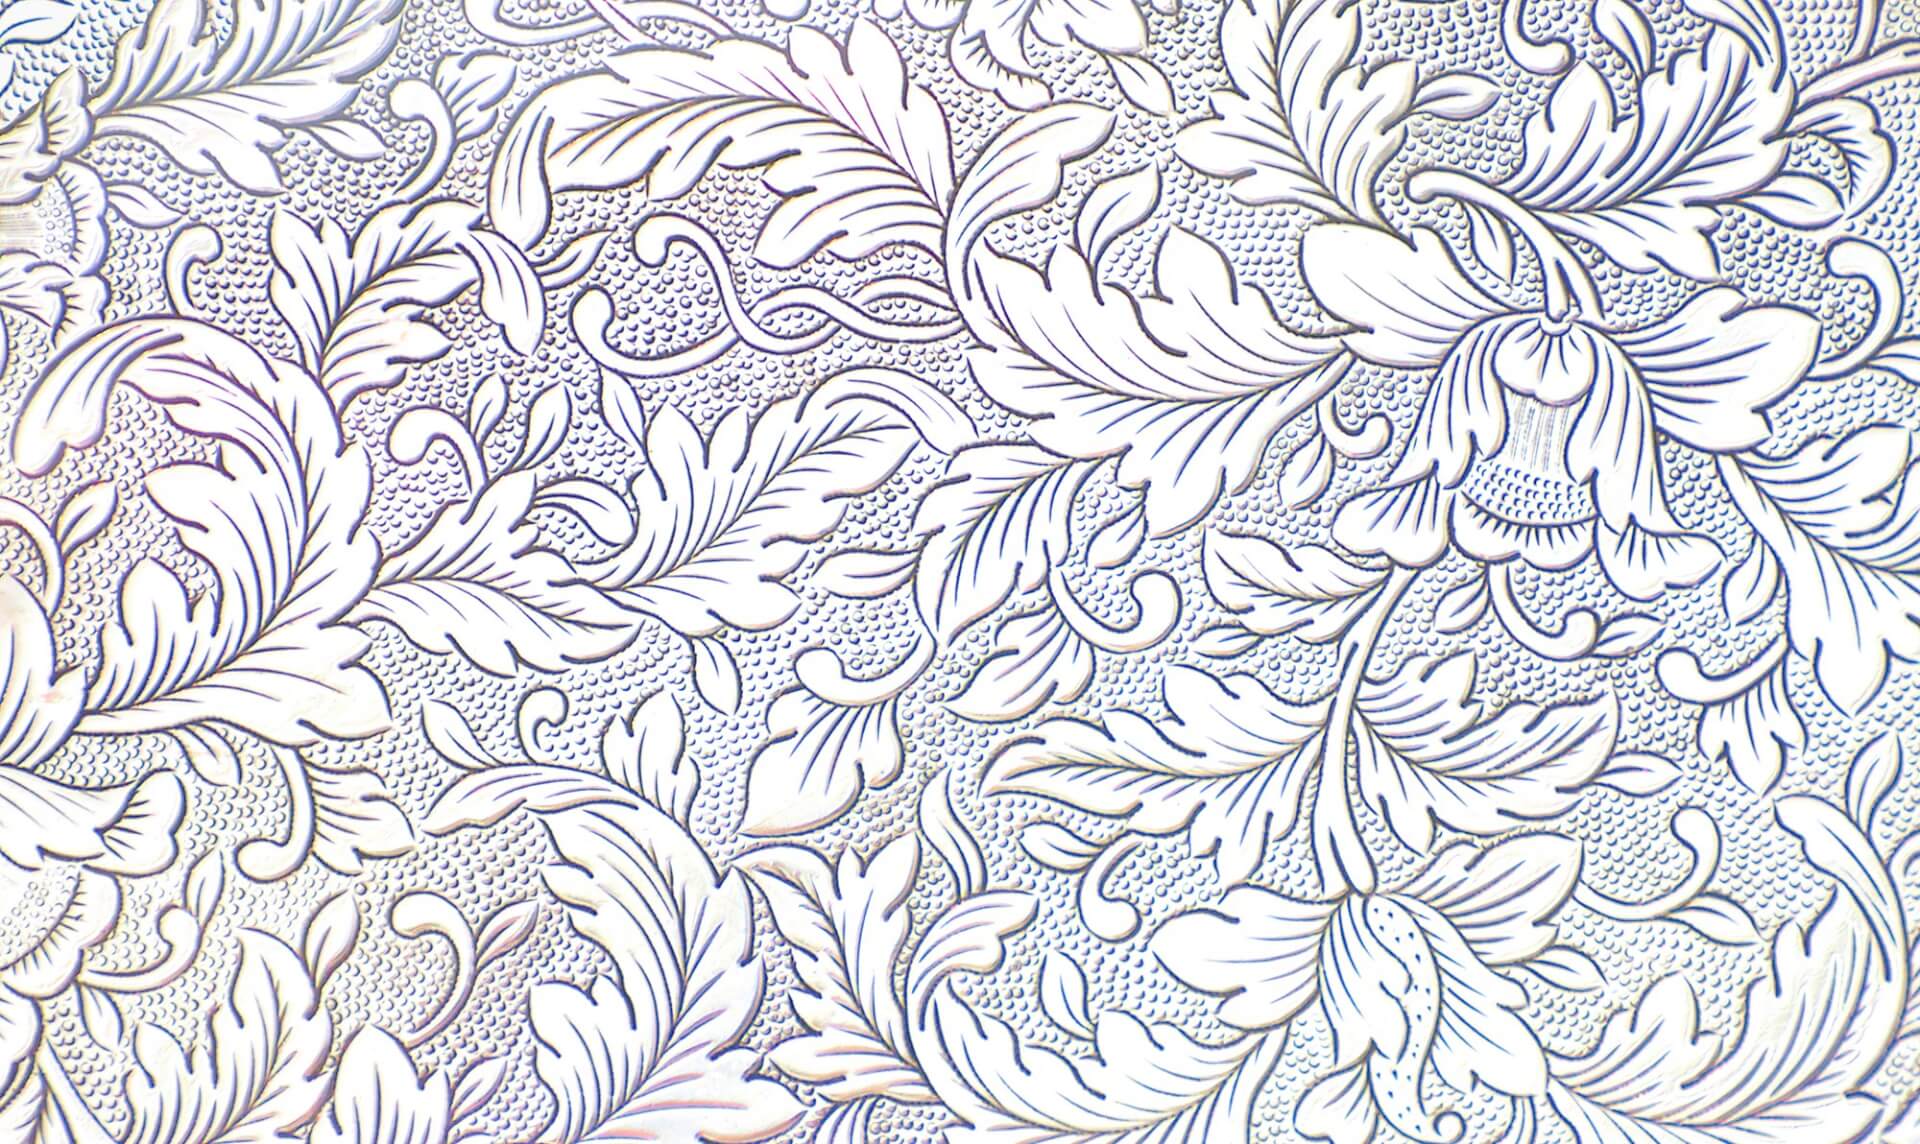 PEM;Peabody Essex Museum;Silver;Pattern;Wall Covering;Zoe Design